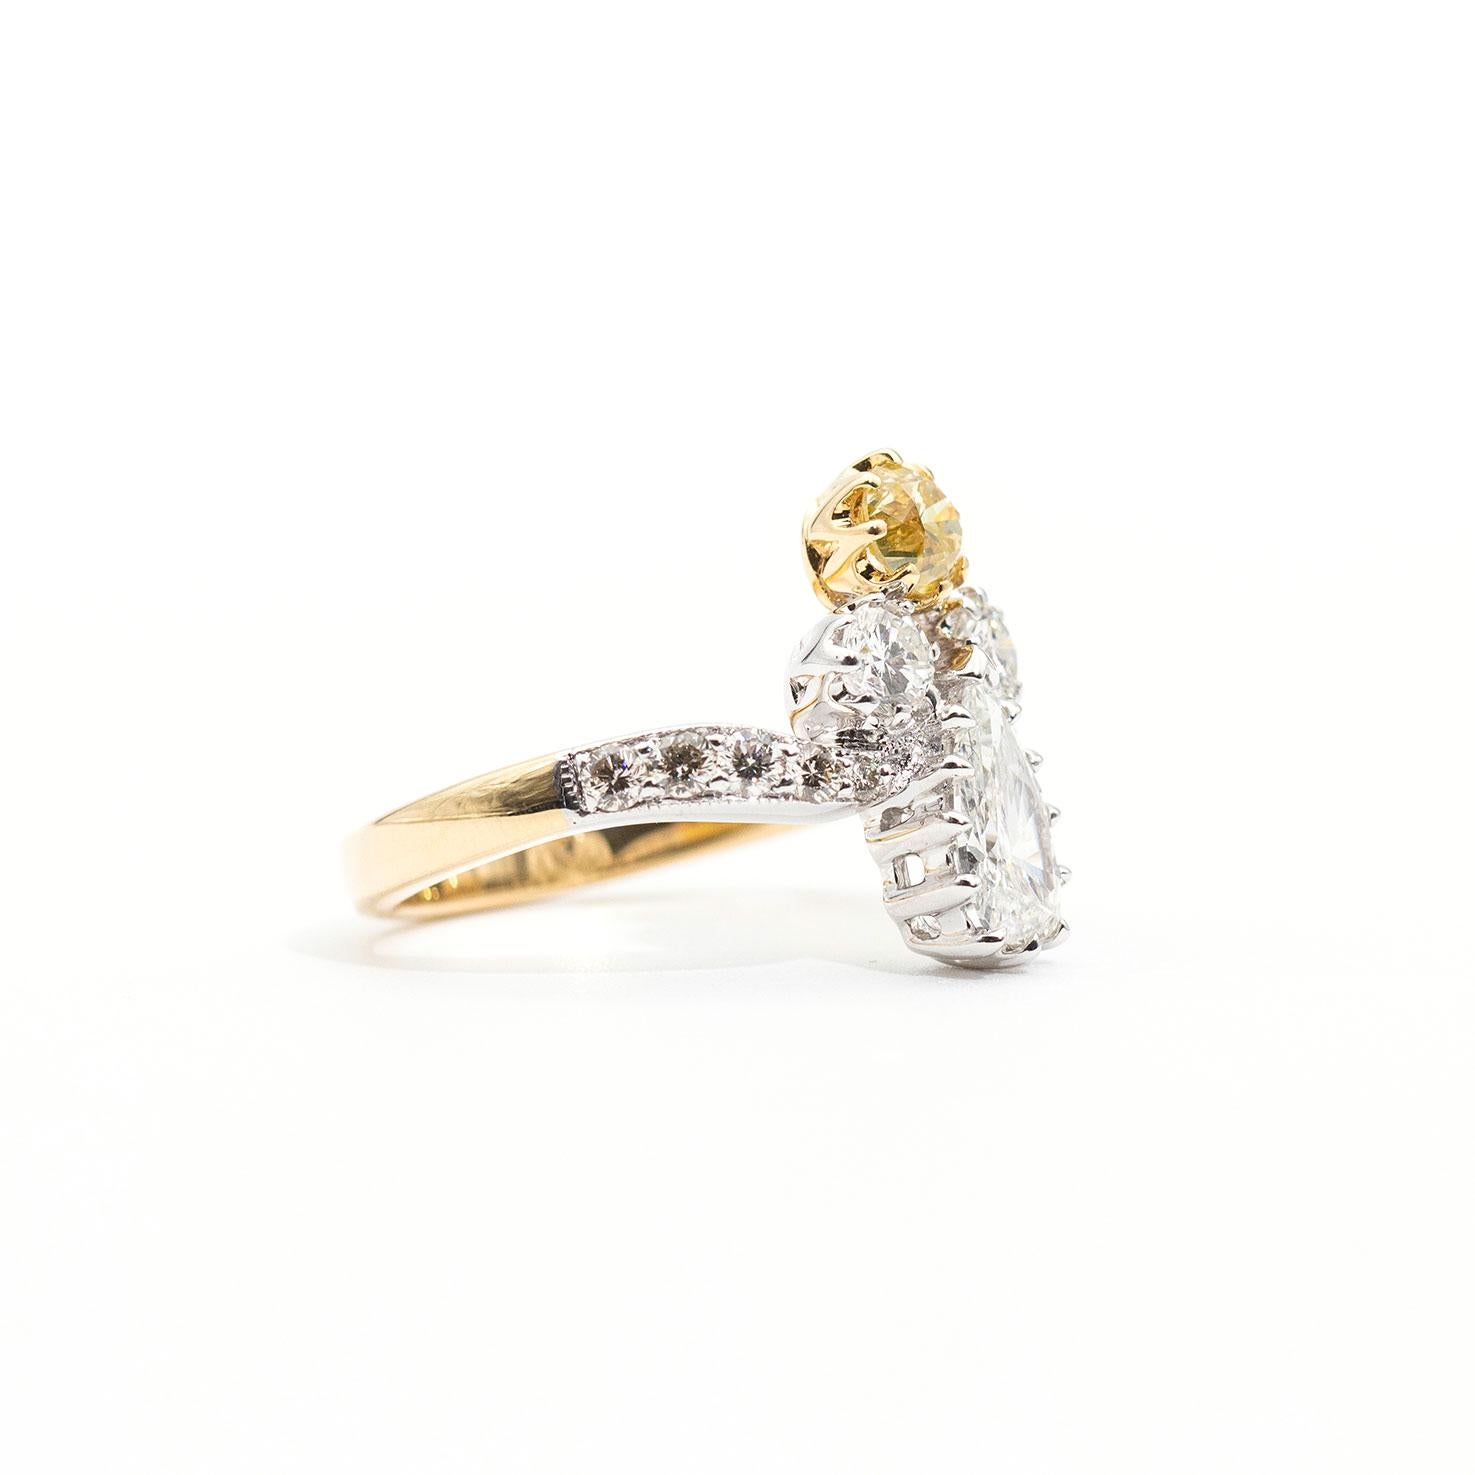 Certified 0.70 Carat Pear and Fancy Yellow Diamond Vintage 18 Carat Gold Ring 5